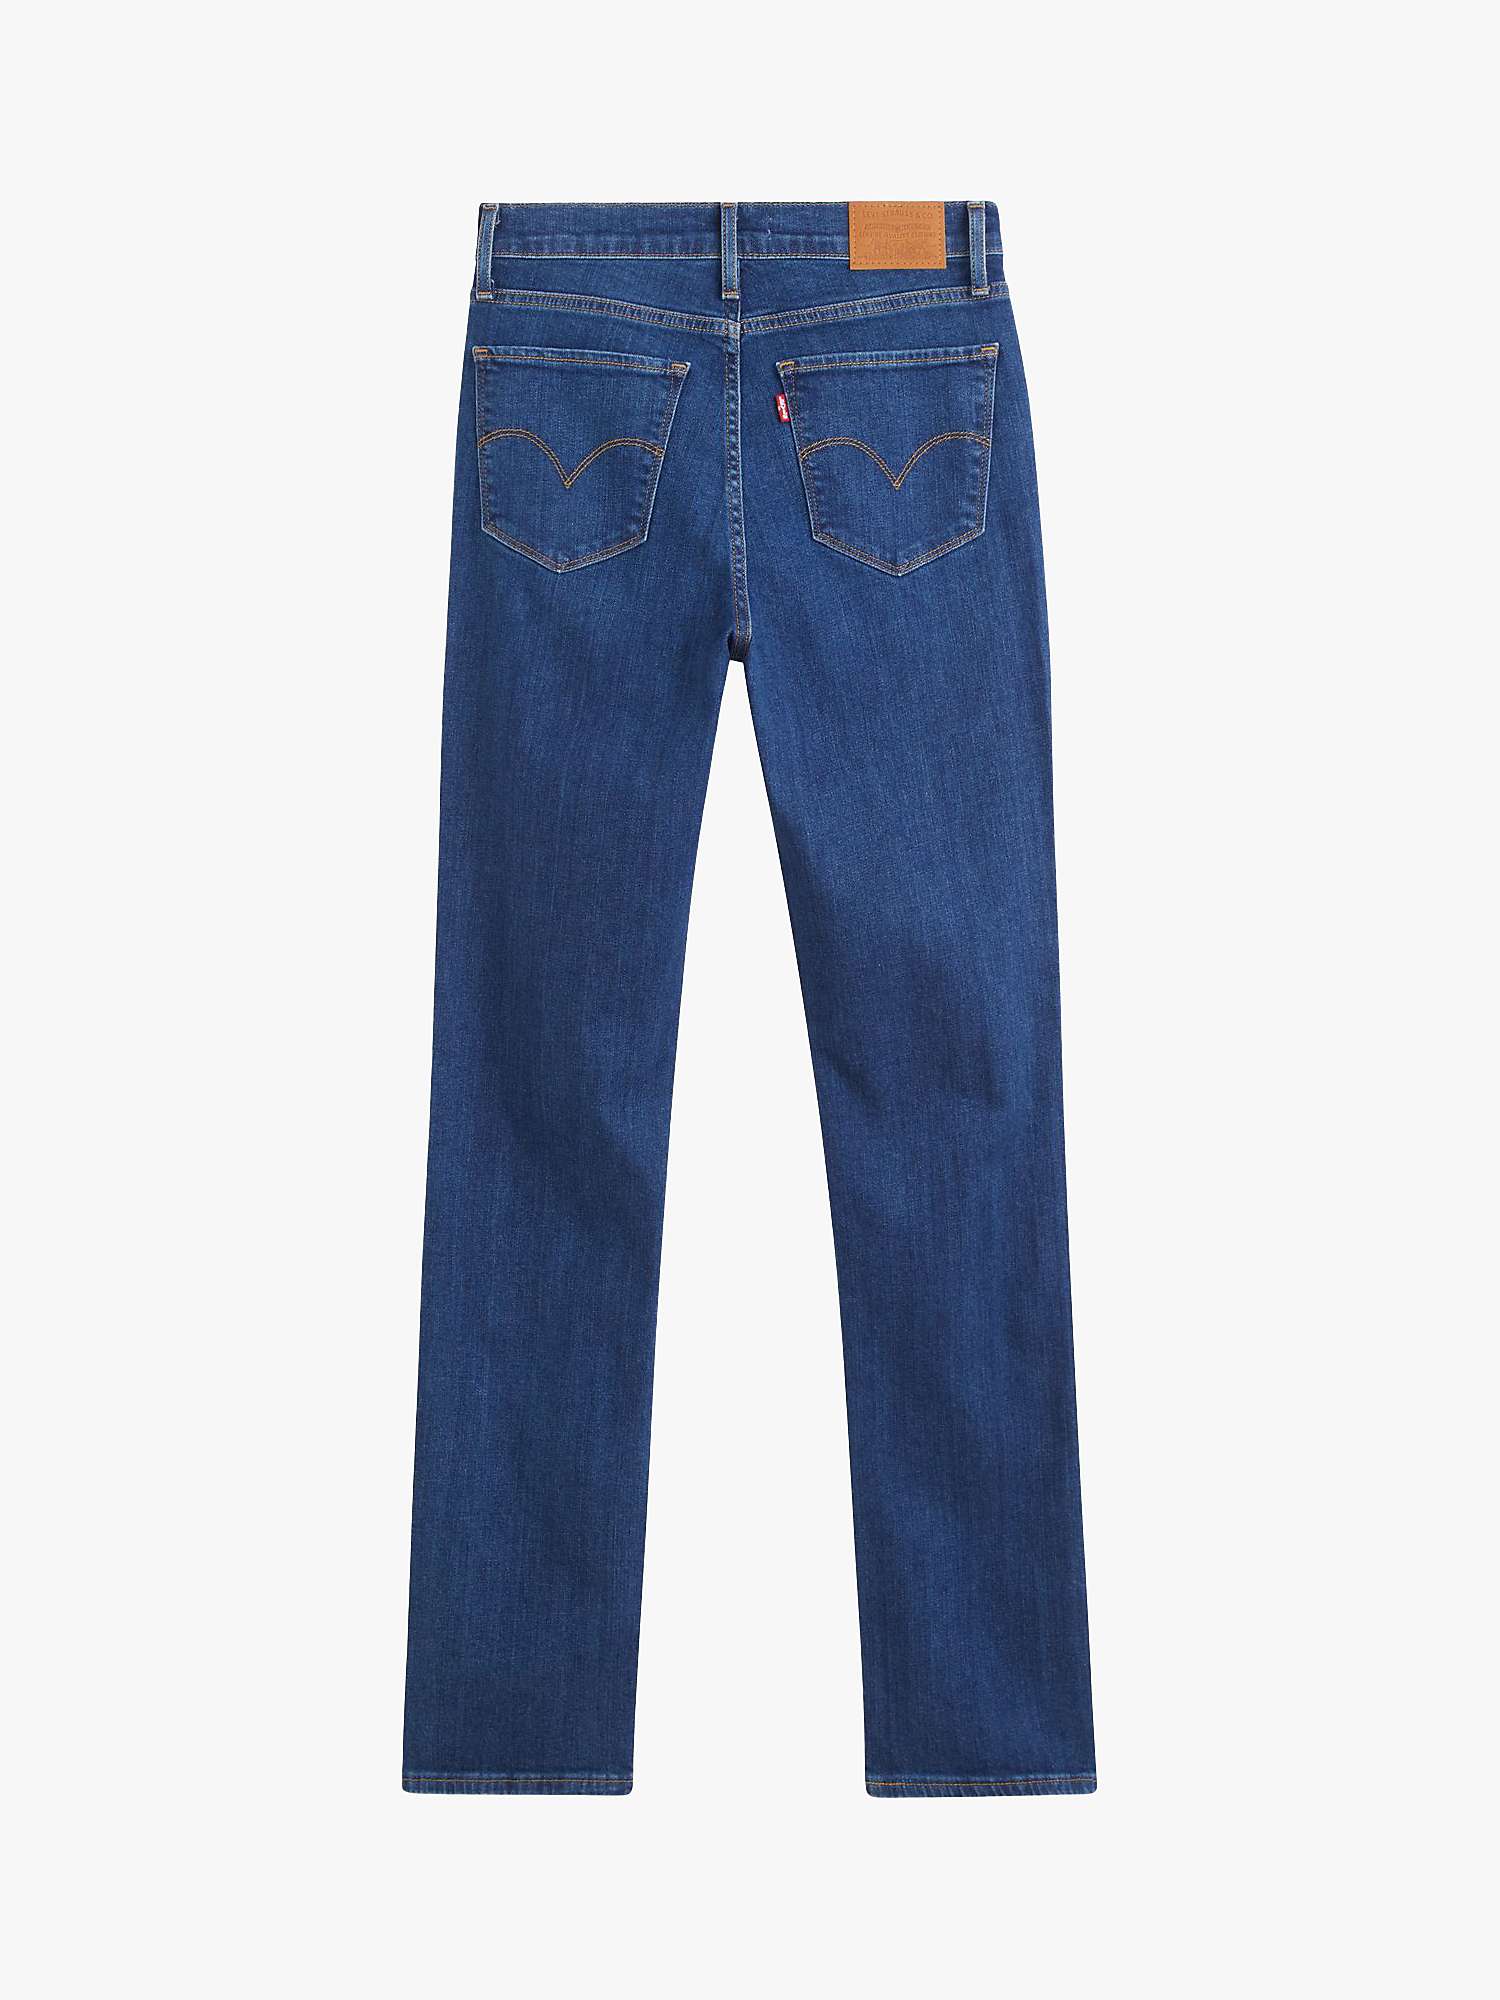 Buy Levi's 724 High Rise Straight Jeans, Non Stop Online at johnlewis.com